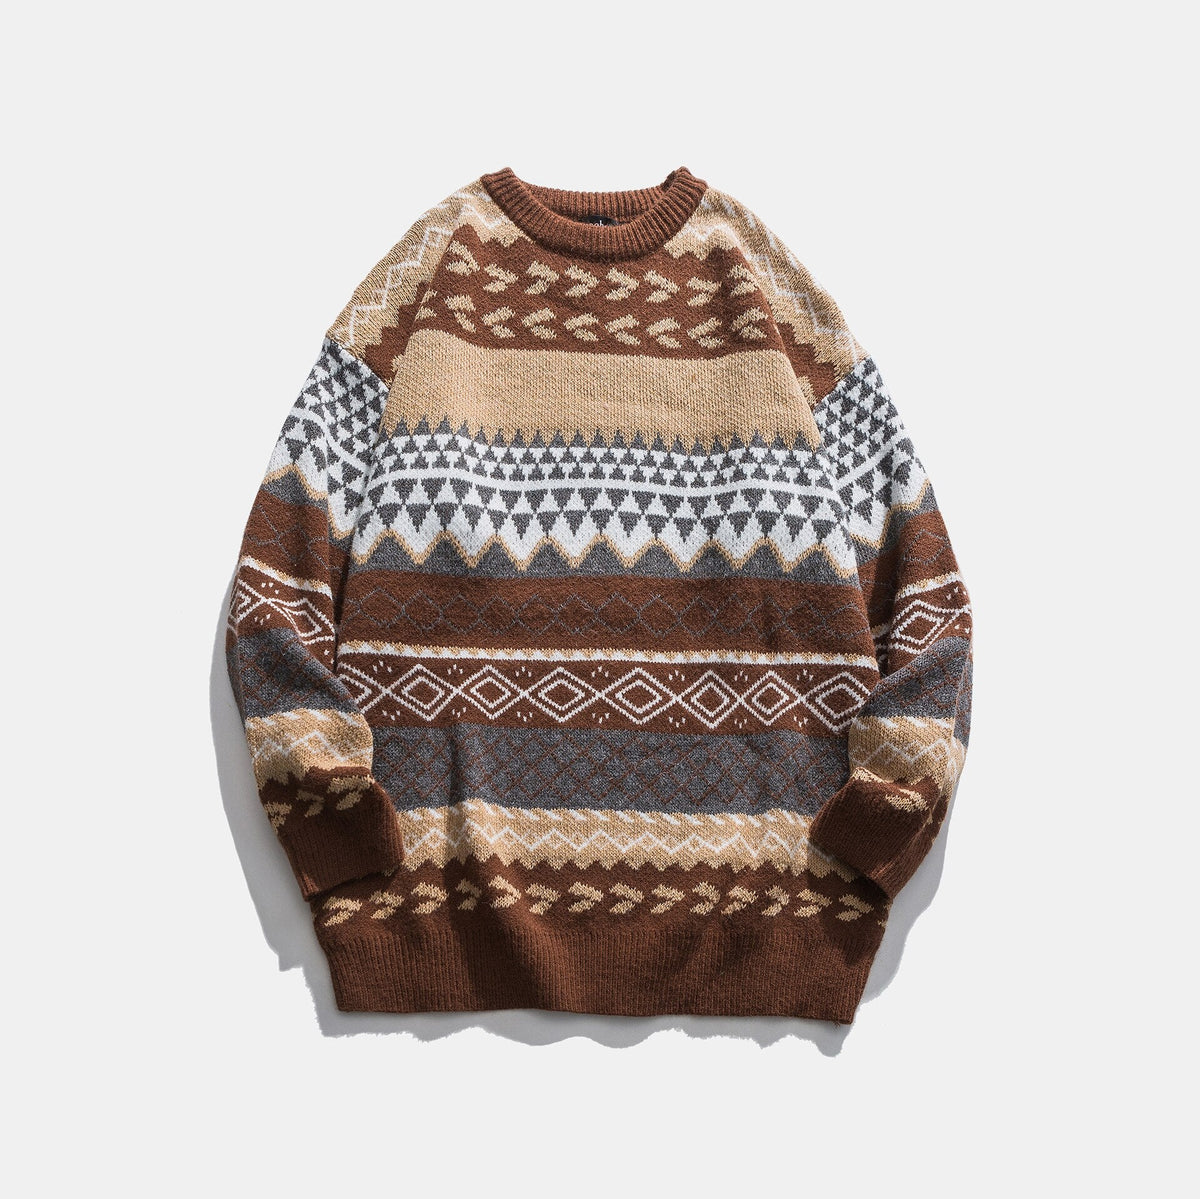 Apricot Harvest Aztec Cotton Men's Sweater | Hypoallergenic - Allergy Friendly - Naturally Free